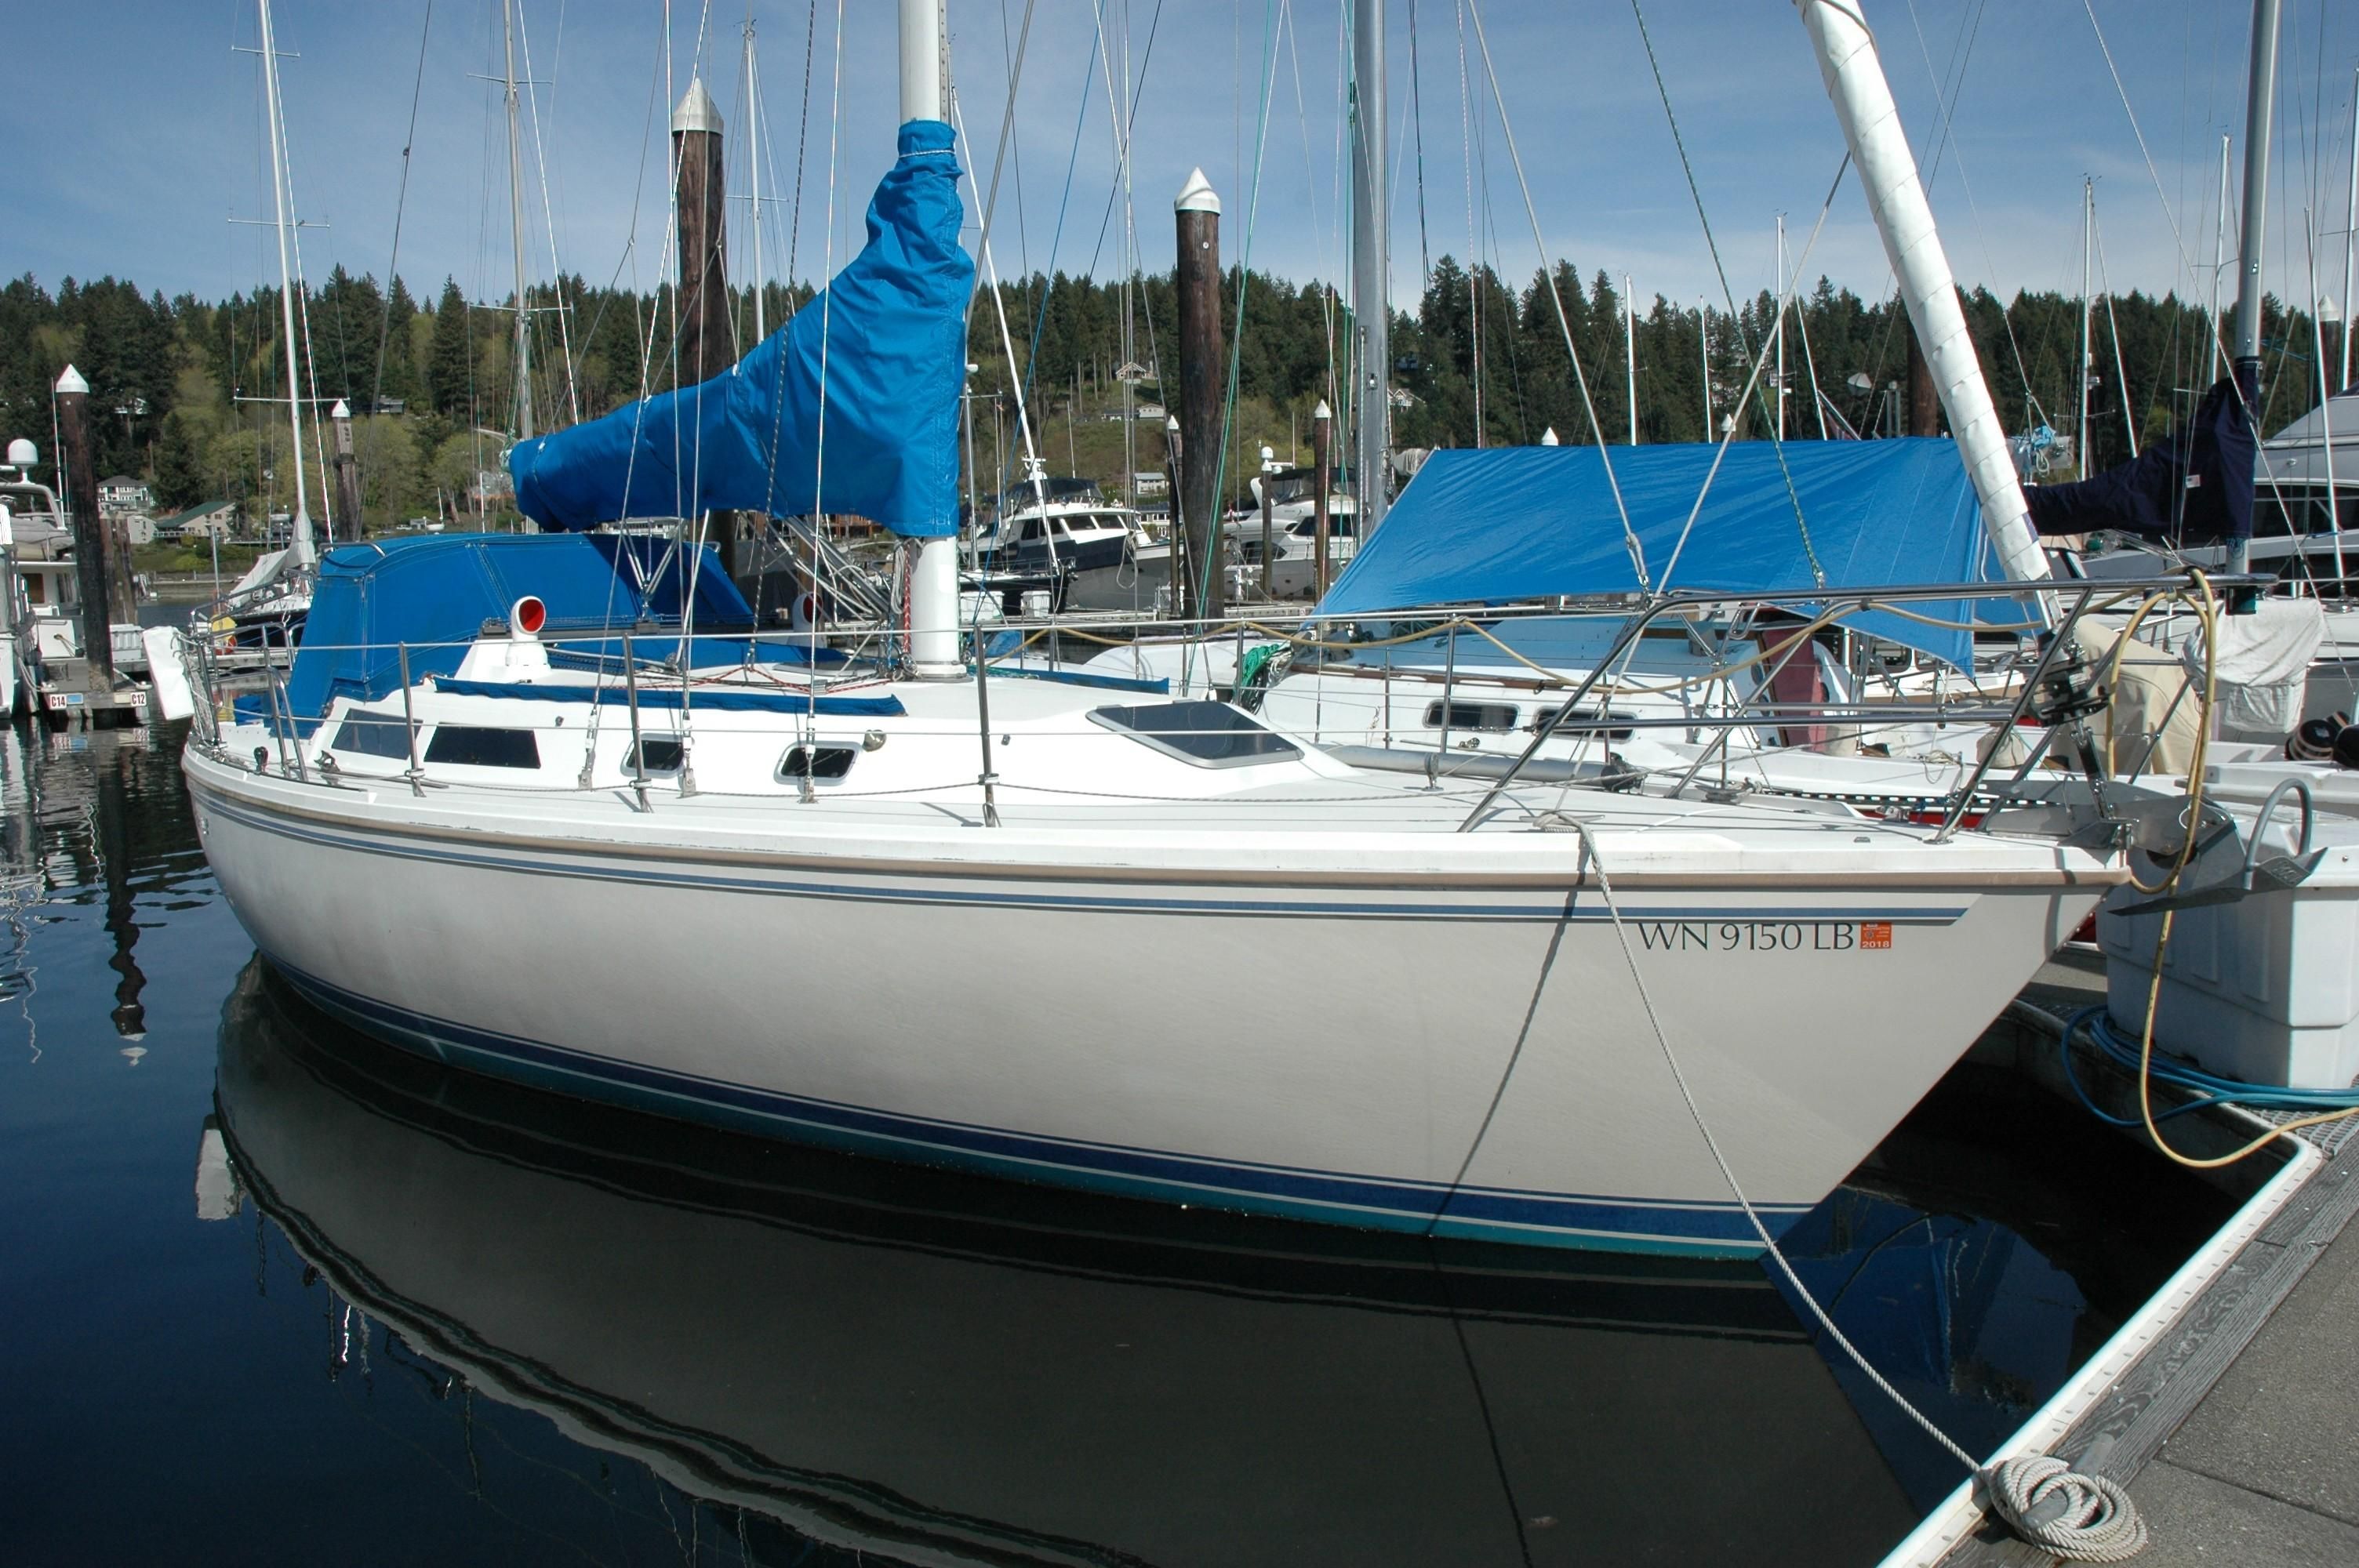 36 ft catalina sailboat for sale